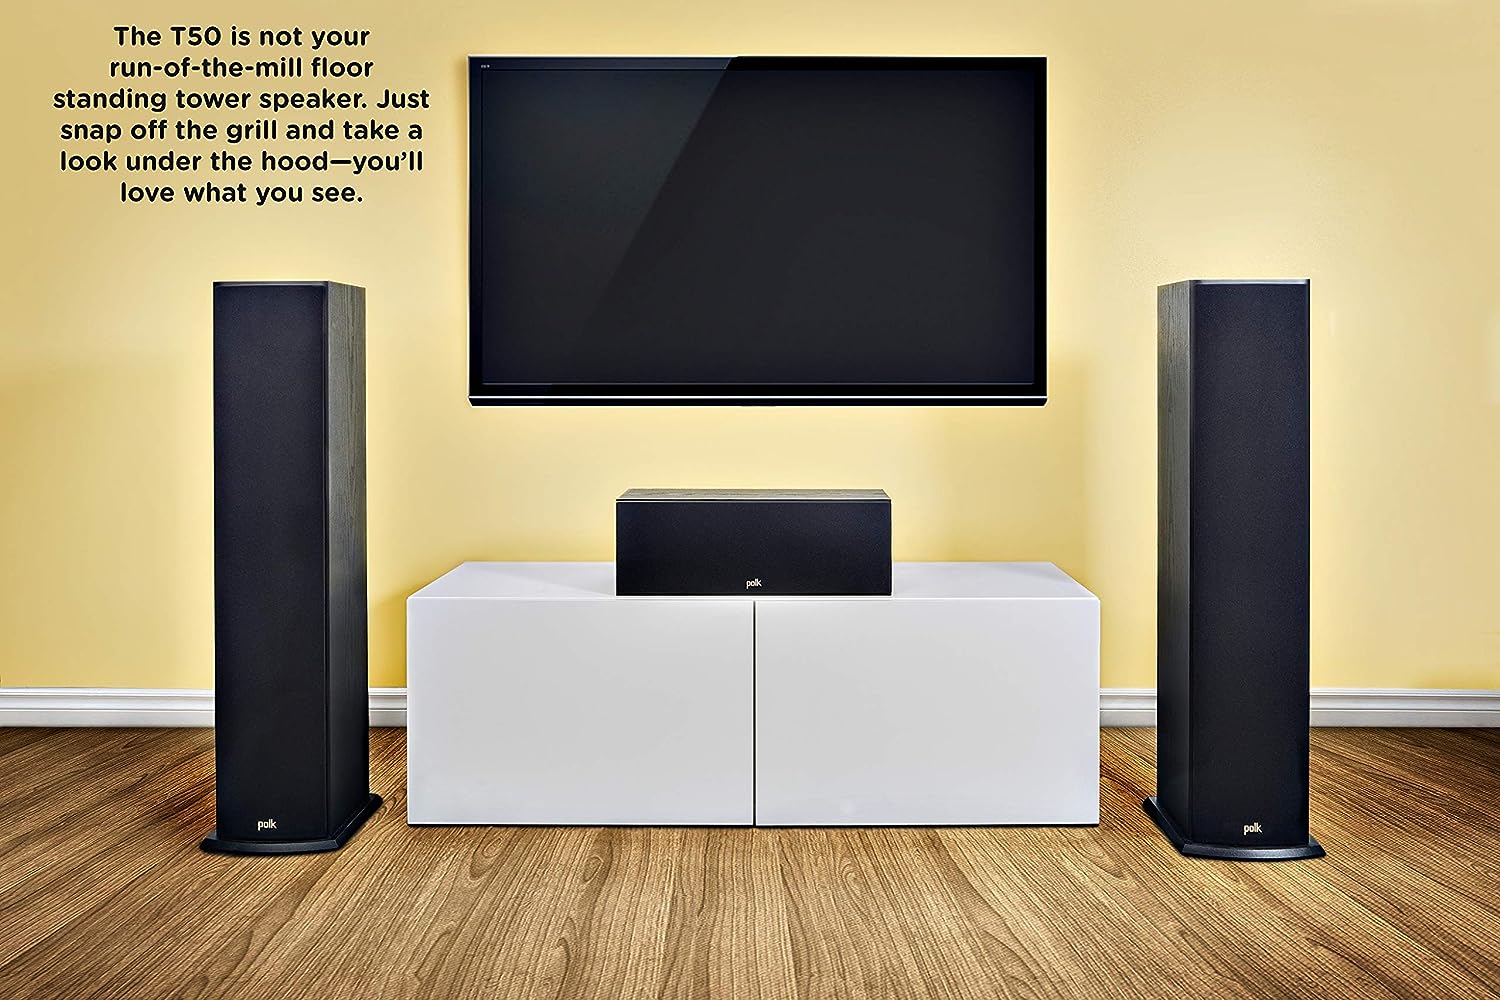 Polk Audio 5.1 Channel Home Theater System with Powered Subwoofer |Two (2) T15 Bookshelf, One (1) T30 Center Channel, Two (2) T50 Tower Speakers, PSW10 Sub | Alexa + HEOS